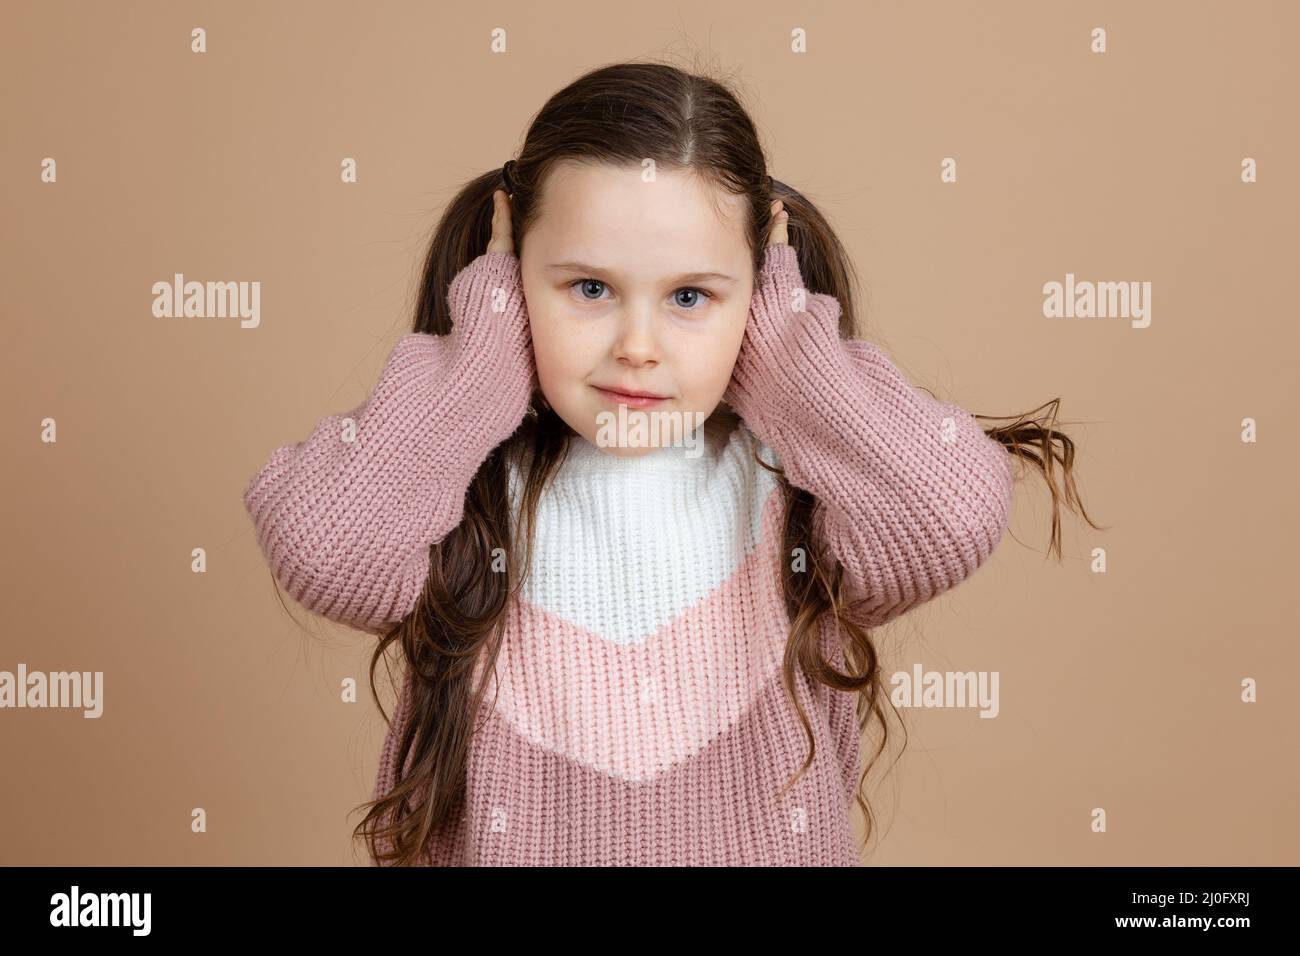 Portrait of young adorable cute smiling girl with long dark hair in white, pink sweater standing, covering ears with hands, posing. Stock Photo